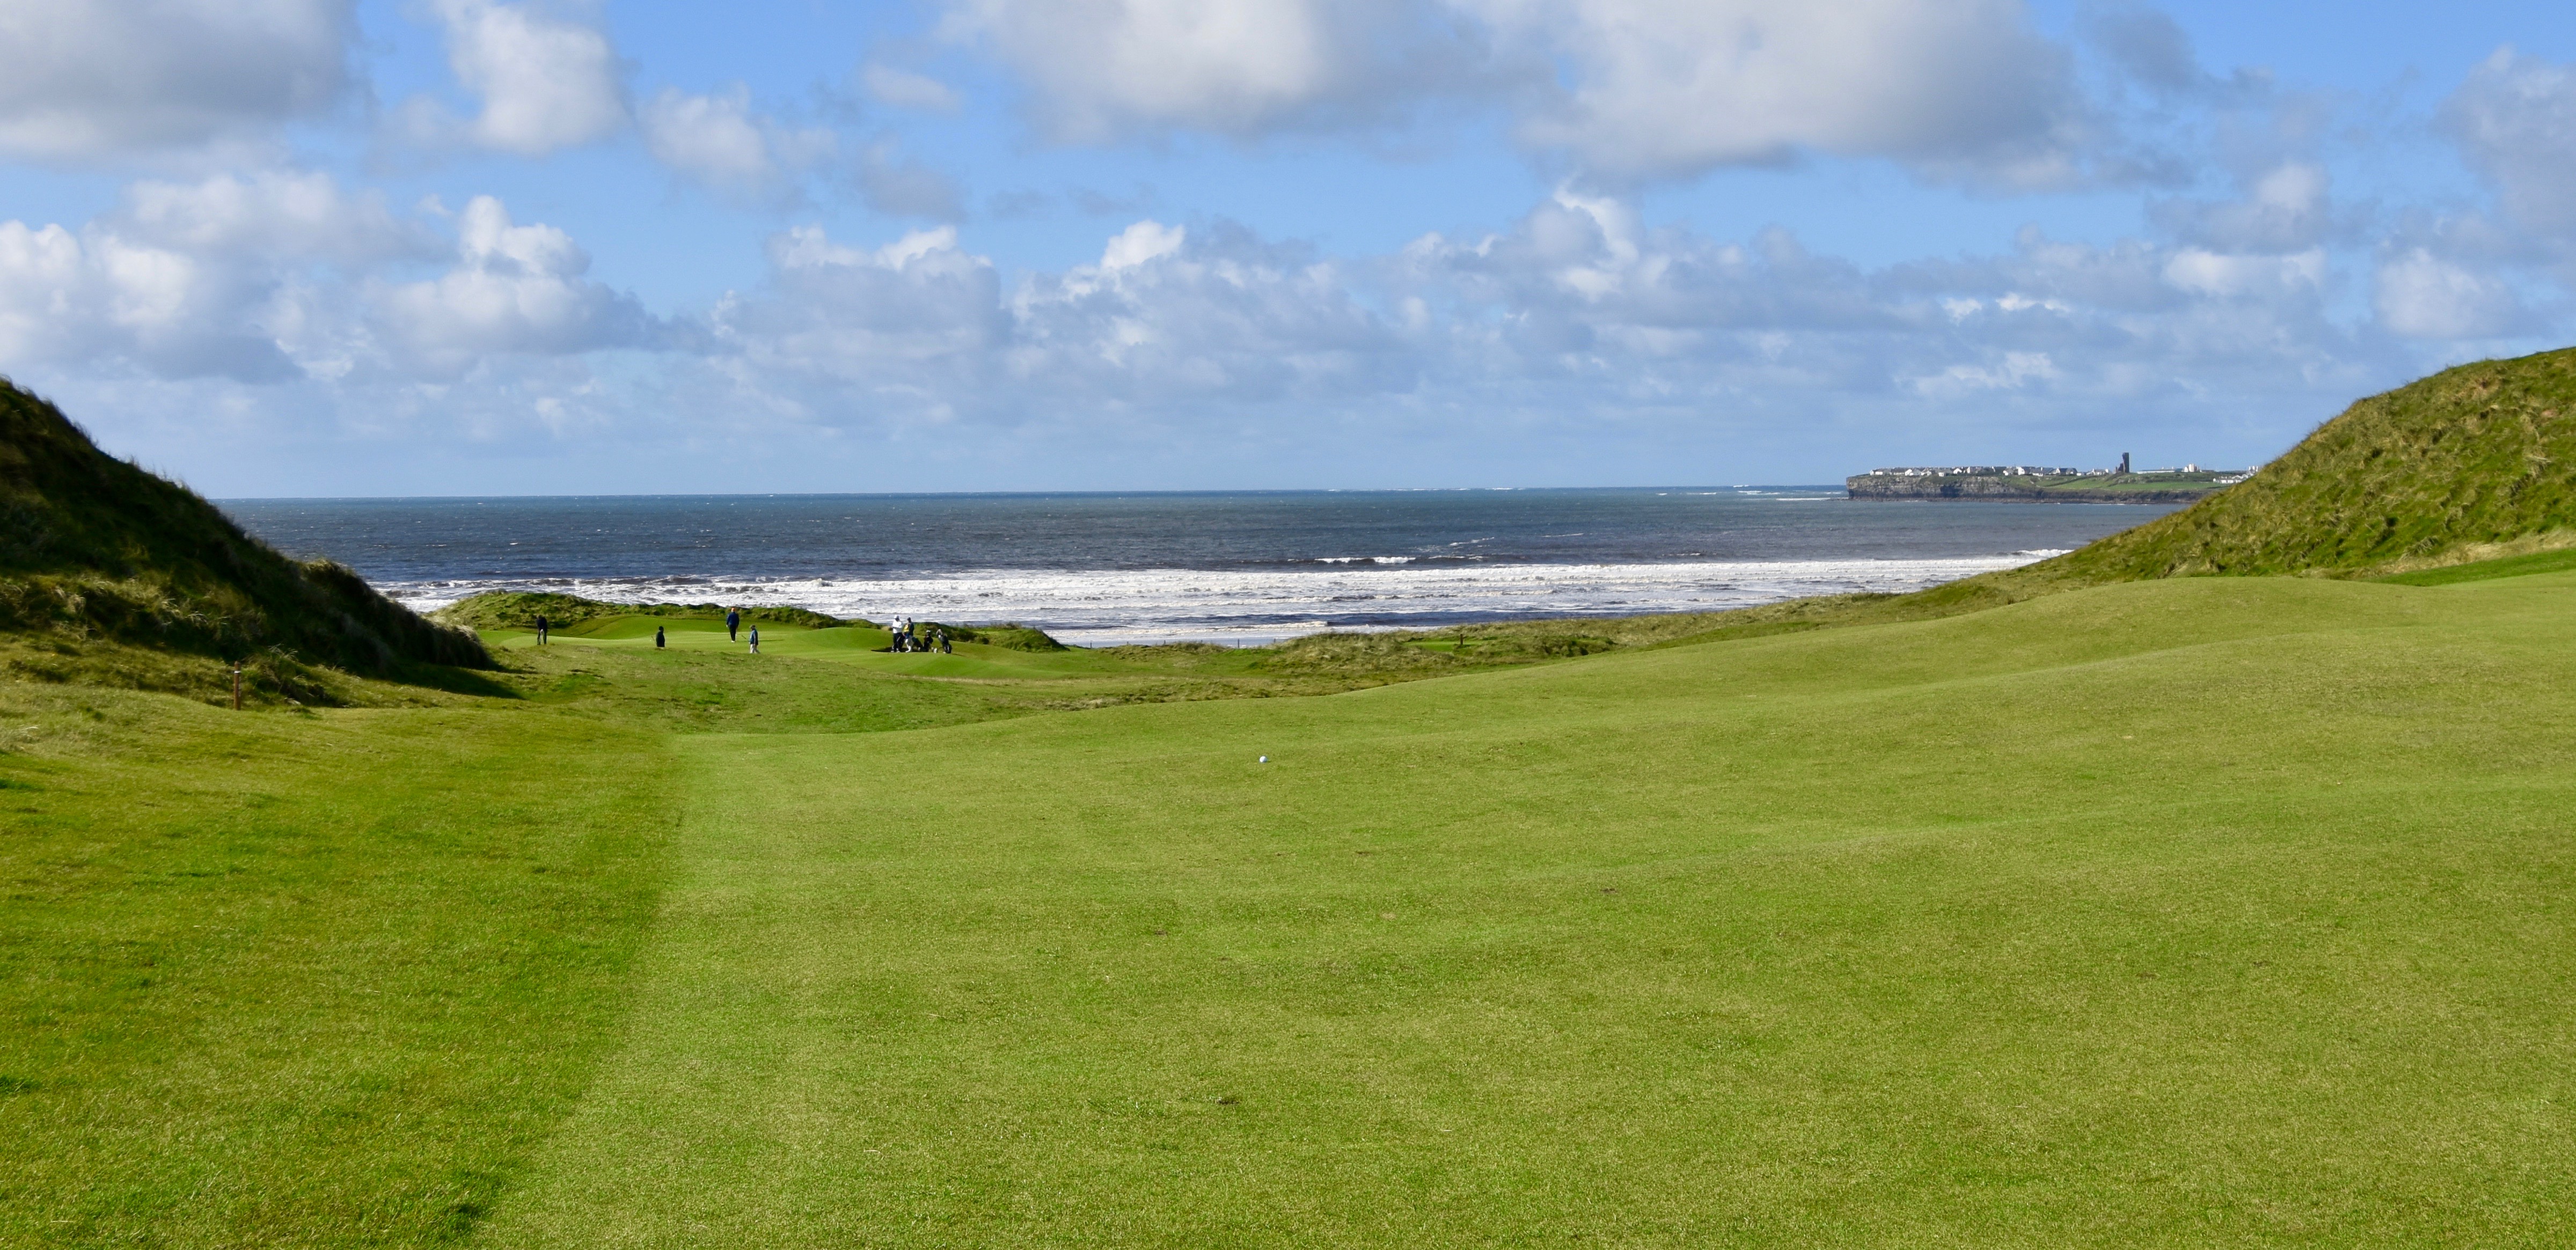 No. 6 Approach, Lahinch